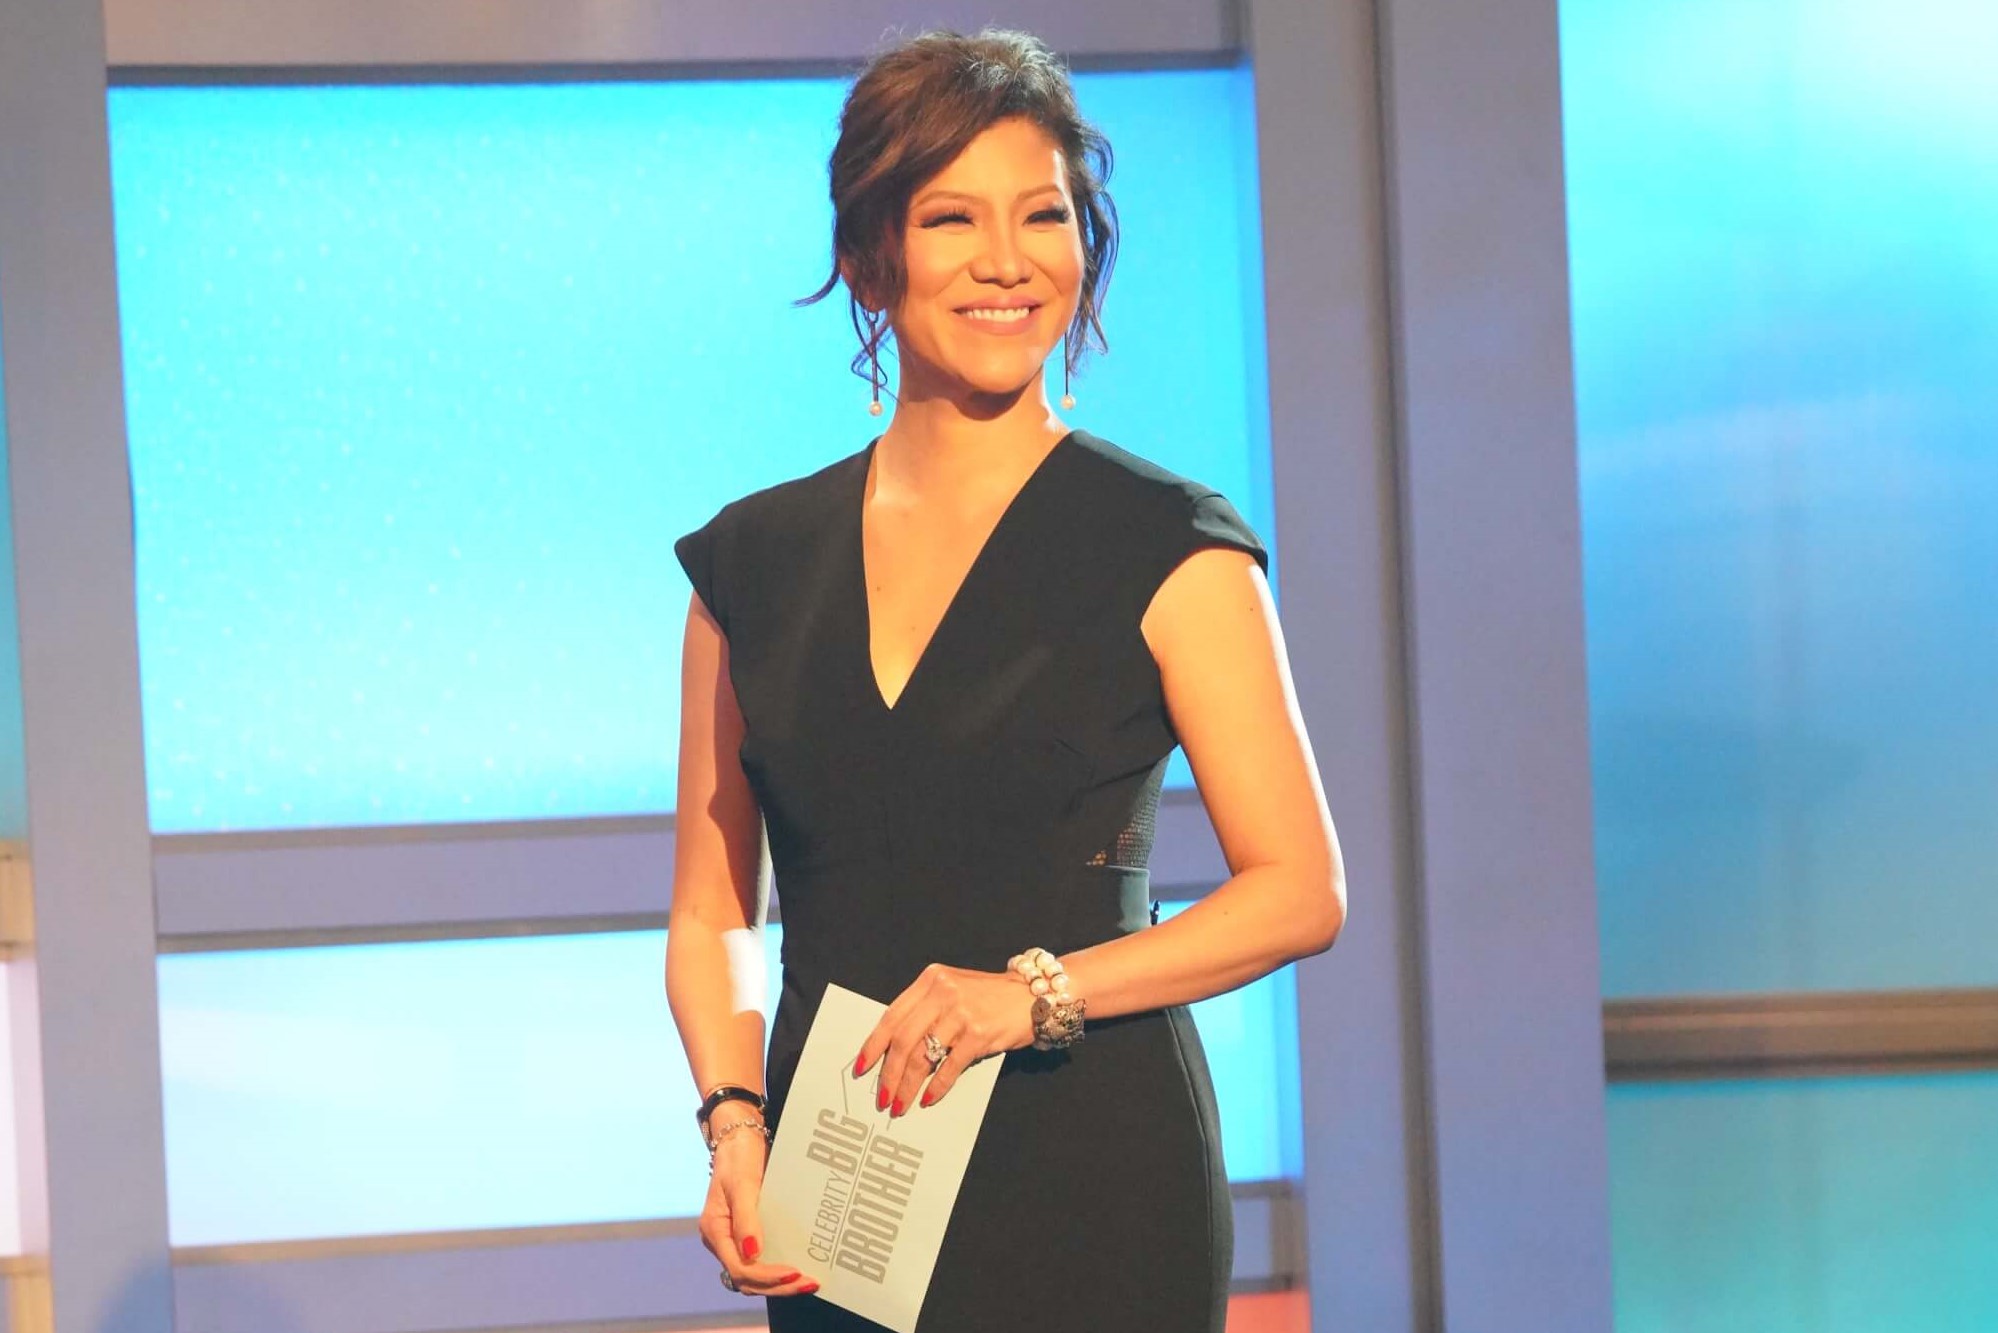 Julie Chen Moonves, the host of every season of 'Big Brother' on CBS, appears onstage in a black dress holding an envelope that says 'Big Brother' on it.